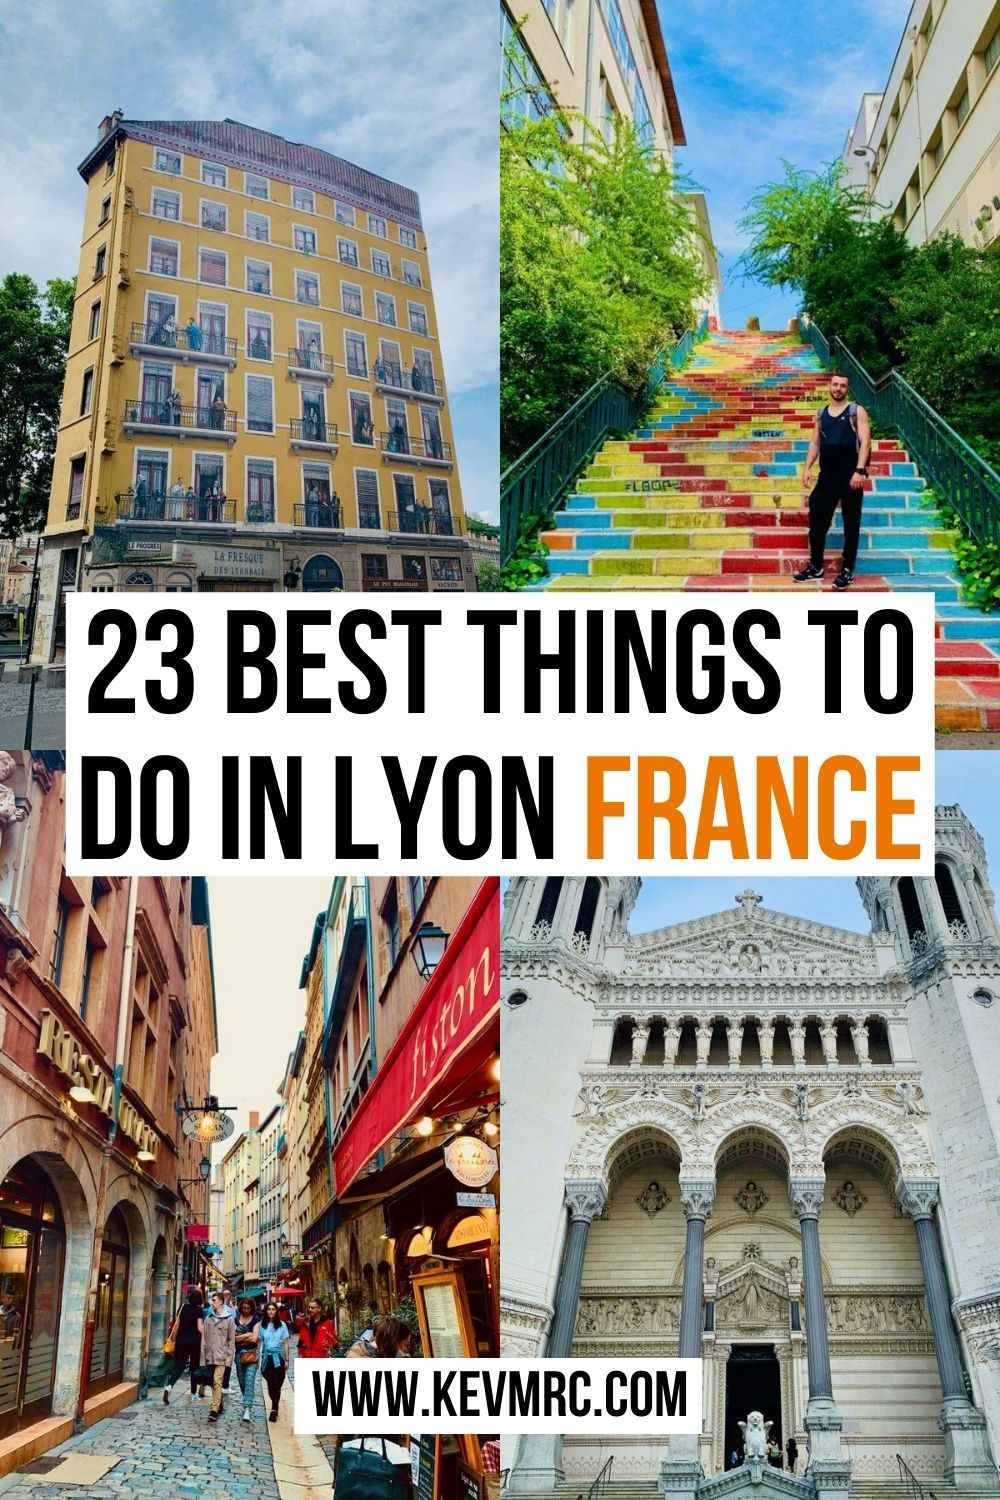 The 23 Best Things to Do in Lyon France. If you're wondering what to do in Lyon during your stay, this guide will help you! lyon travel guide | visit lyon | lyon best things to do 